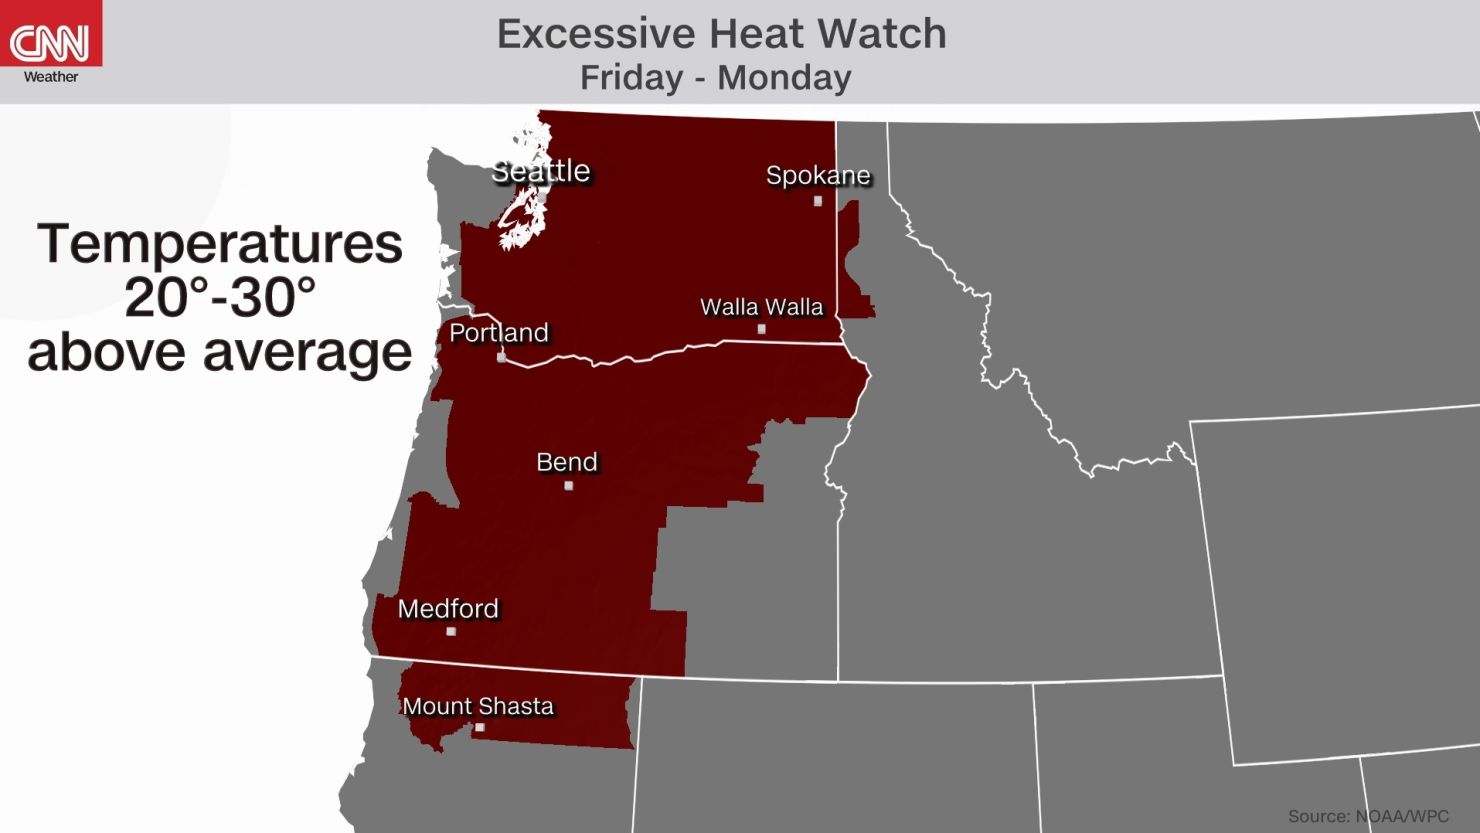 Extreme heat is expected in the Pacific Northwest this weekend.